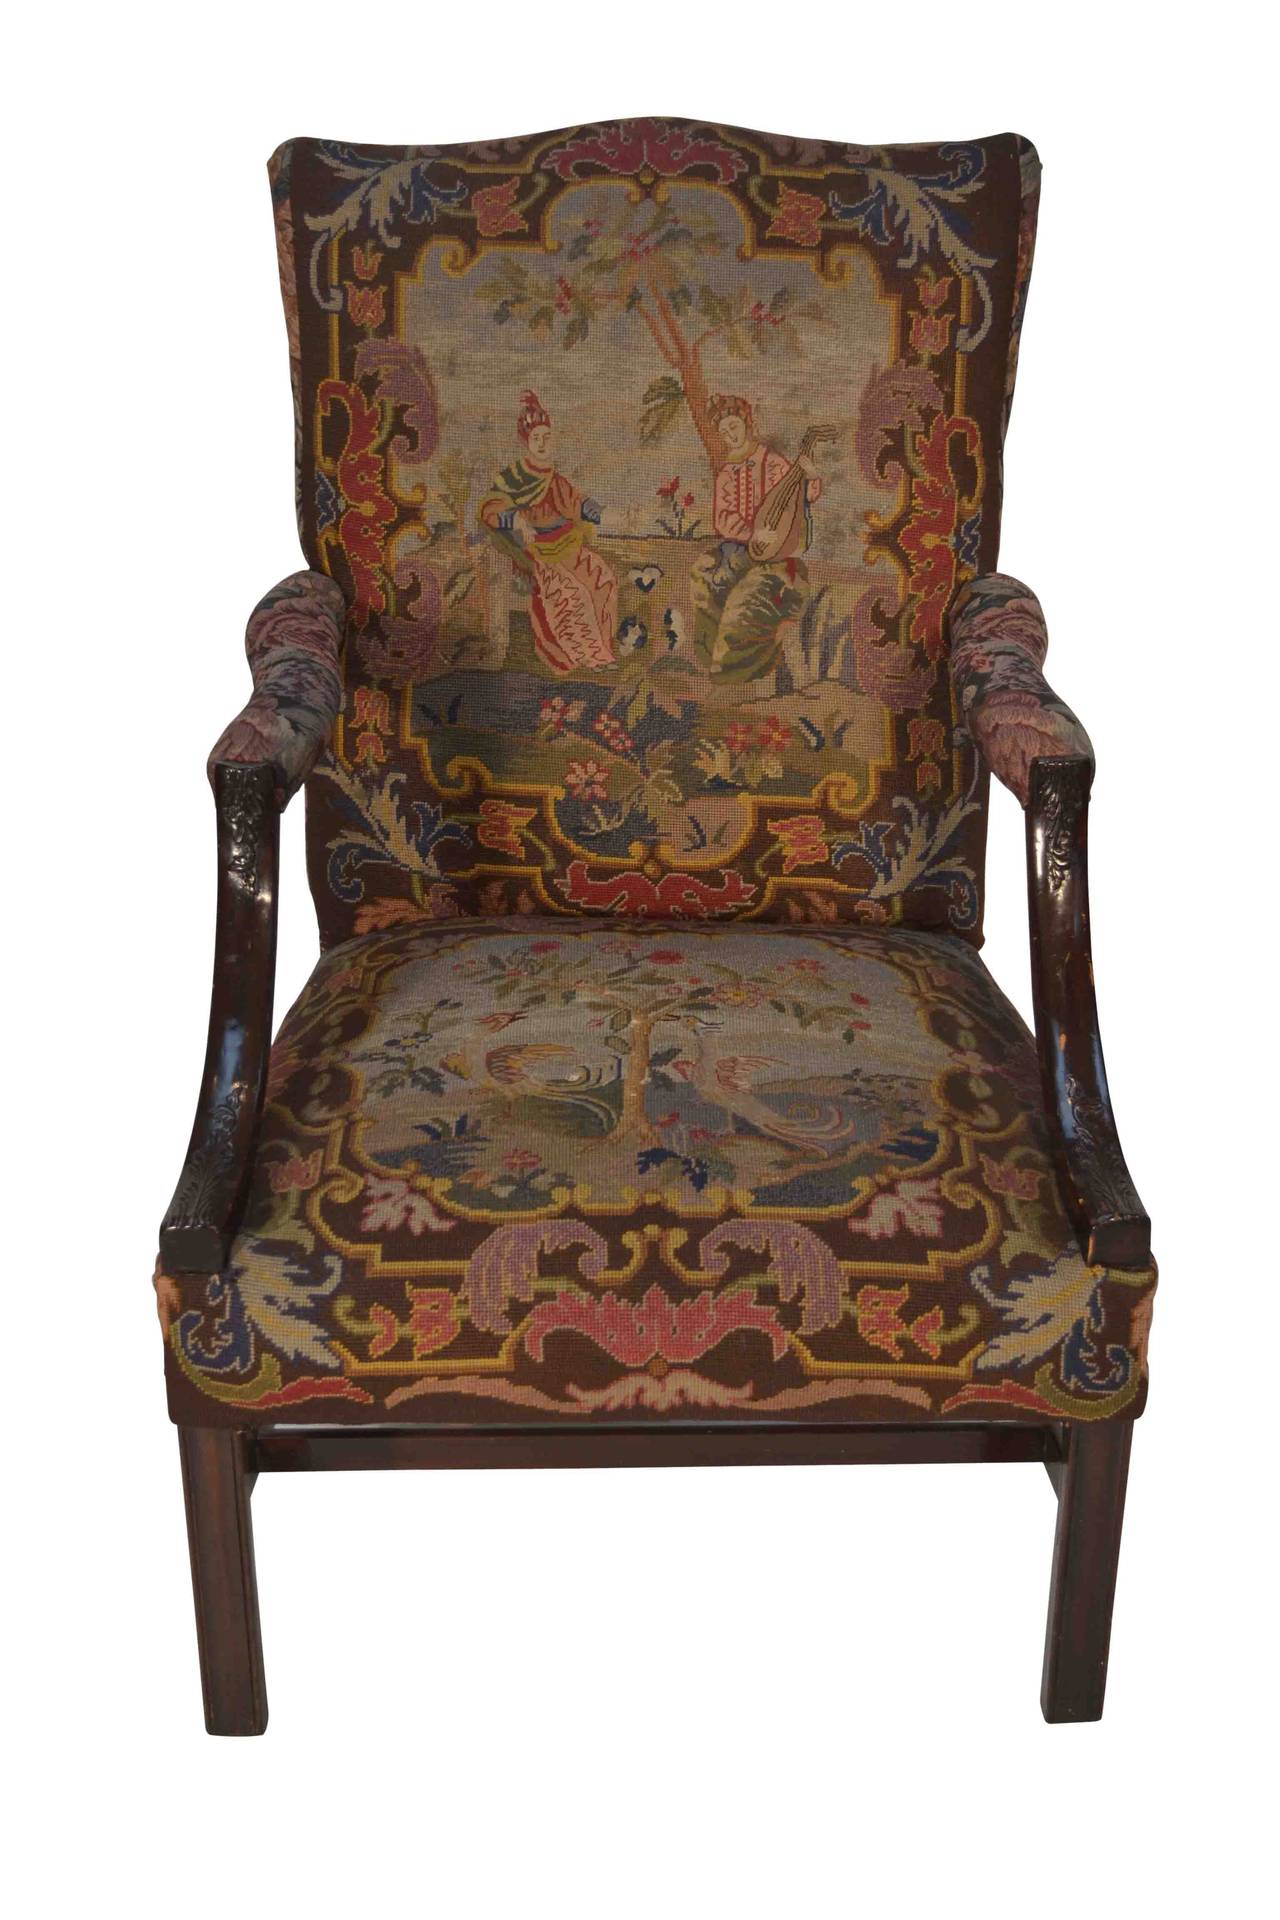 Carved 19 Century English Chippendale Style Library Chair